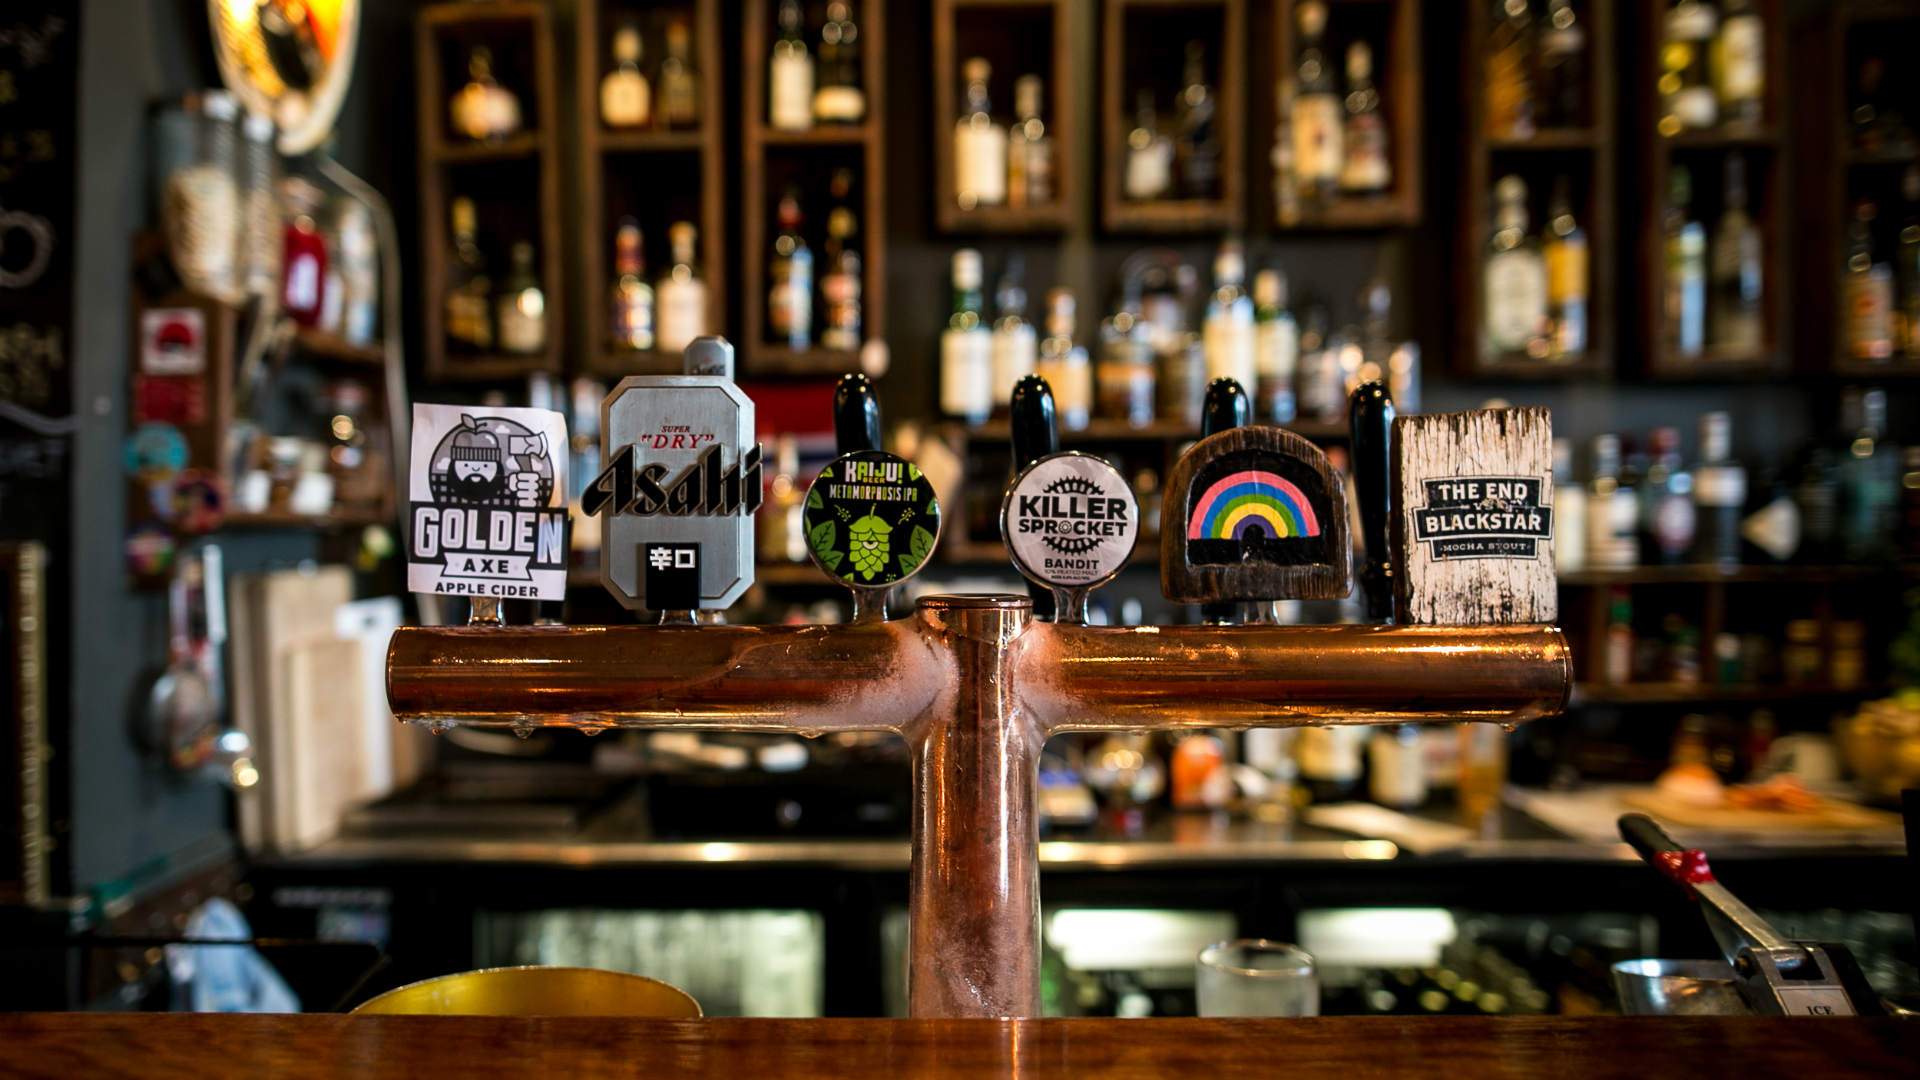 This Australian Bar Is Brewing Rainbow Beer for Marriage Equality